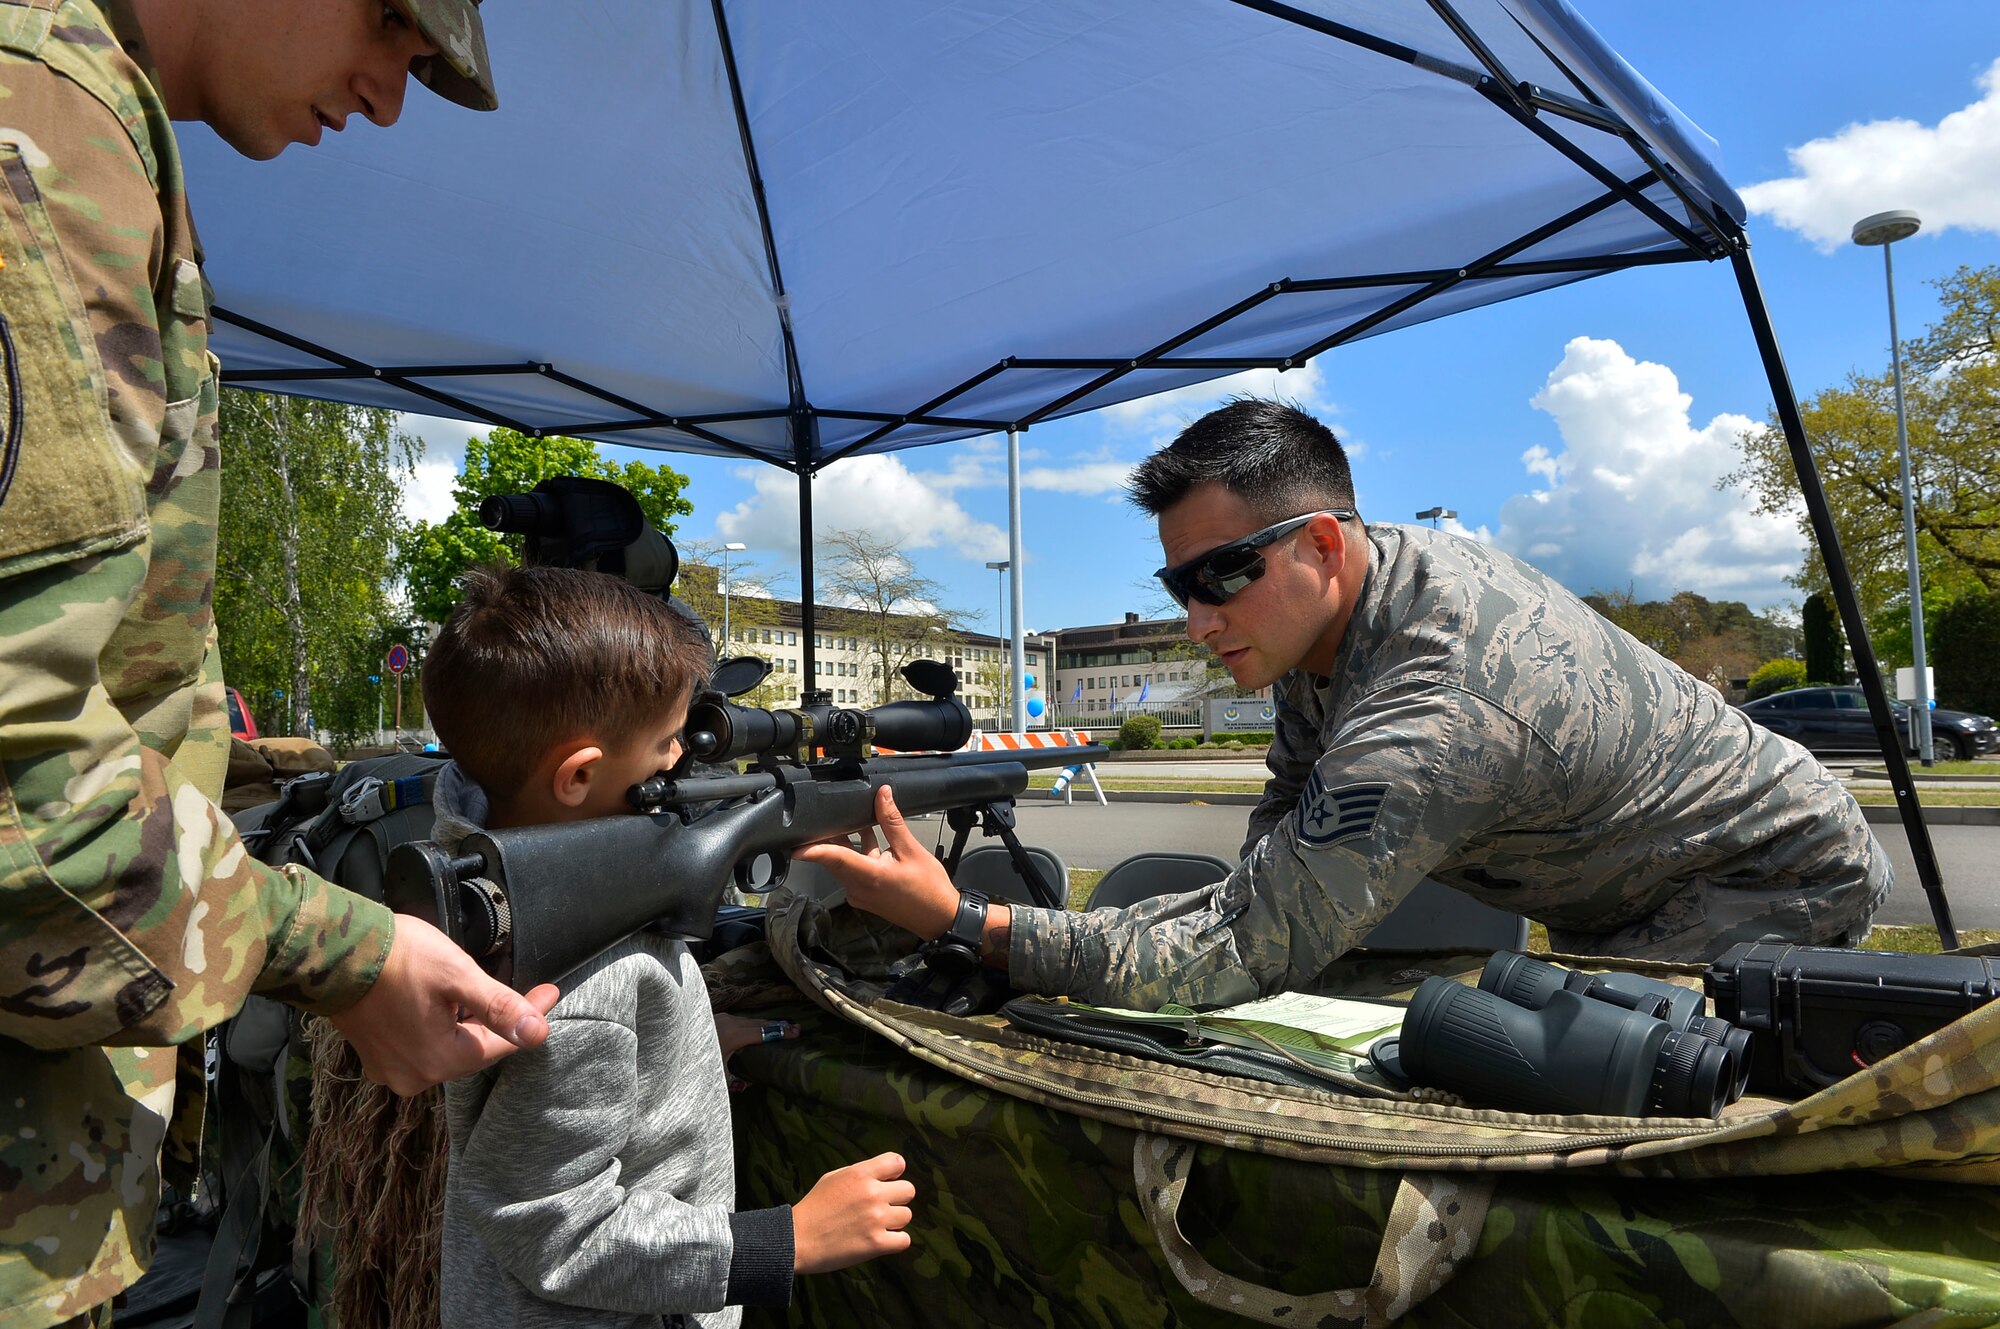 Staff Sgt. Edgar Cerillo, 435th Security Forces Squadron training instructor, far right, helps a child look through the scope of a rifle on Ramstein Air Base, Germany, May 13, 2017. Ramstein conducted a day-long family-friendly police display to kick off Police Week. (U.S. Air Force photo by Airman 1st Class Joshua Magbanua) 